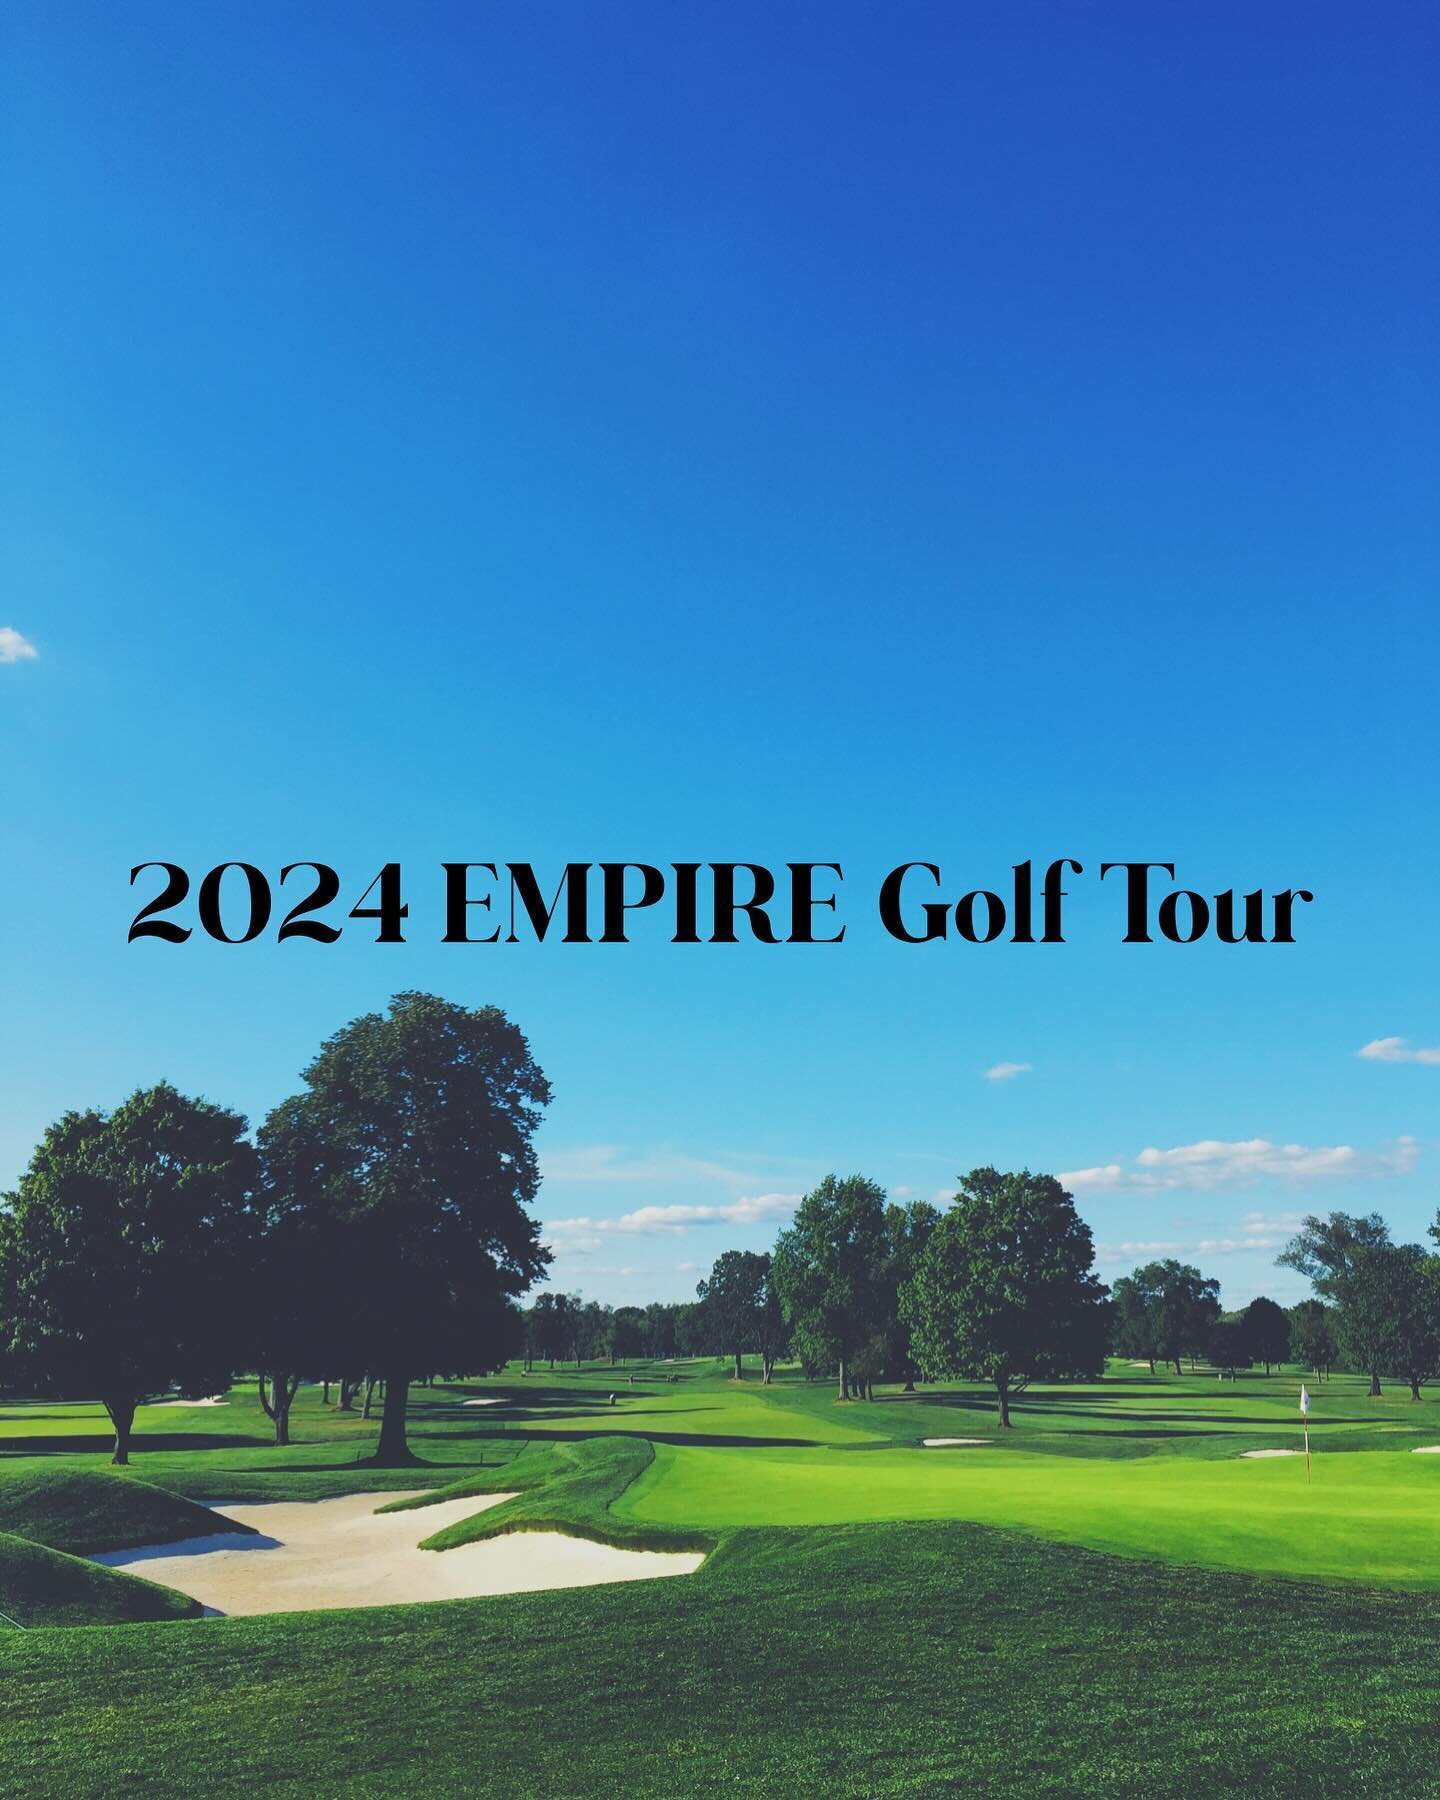 April to August Tour
Registration opens up January 1, 2024 and look forward to seeing everyone out playing at all the events in 2024. Tons of cash prizes, cars to win, watches to win and great memories to have. 

#golf #golfing #golftournament #play 